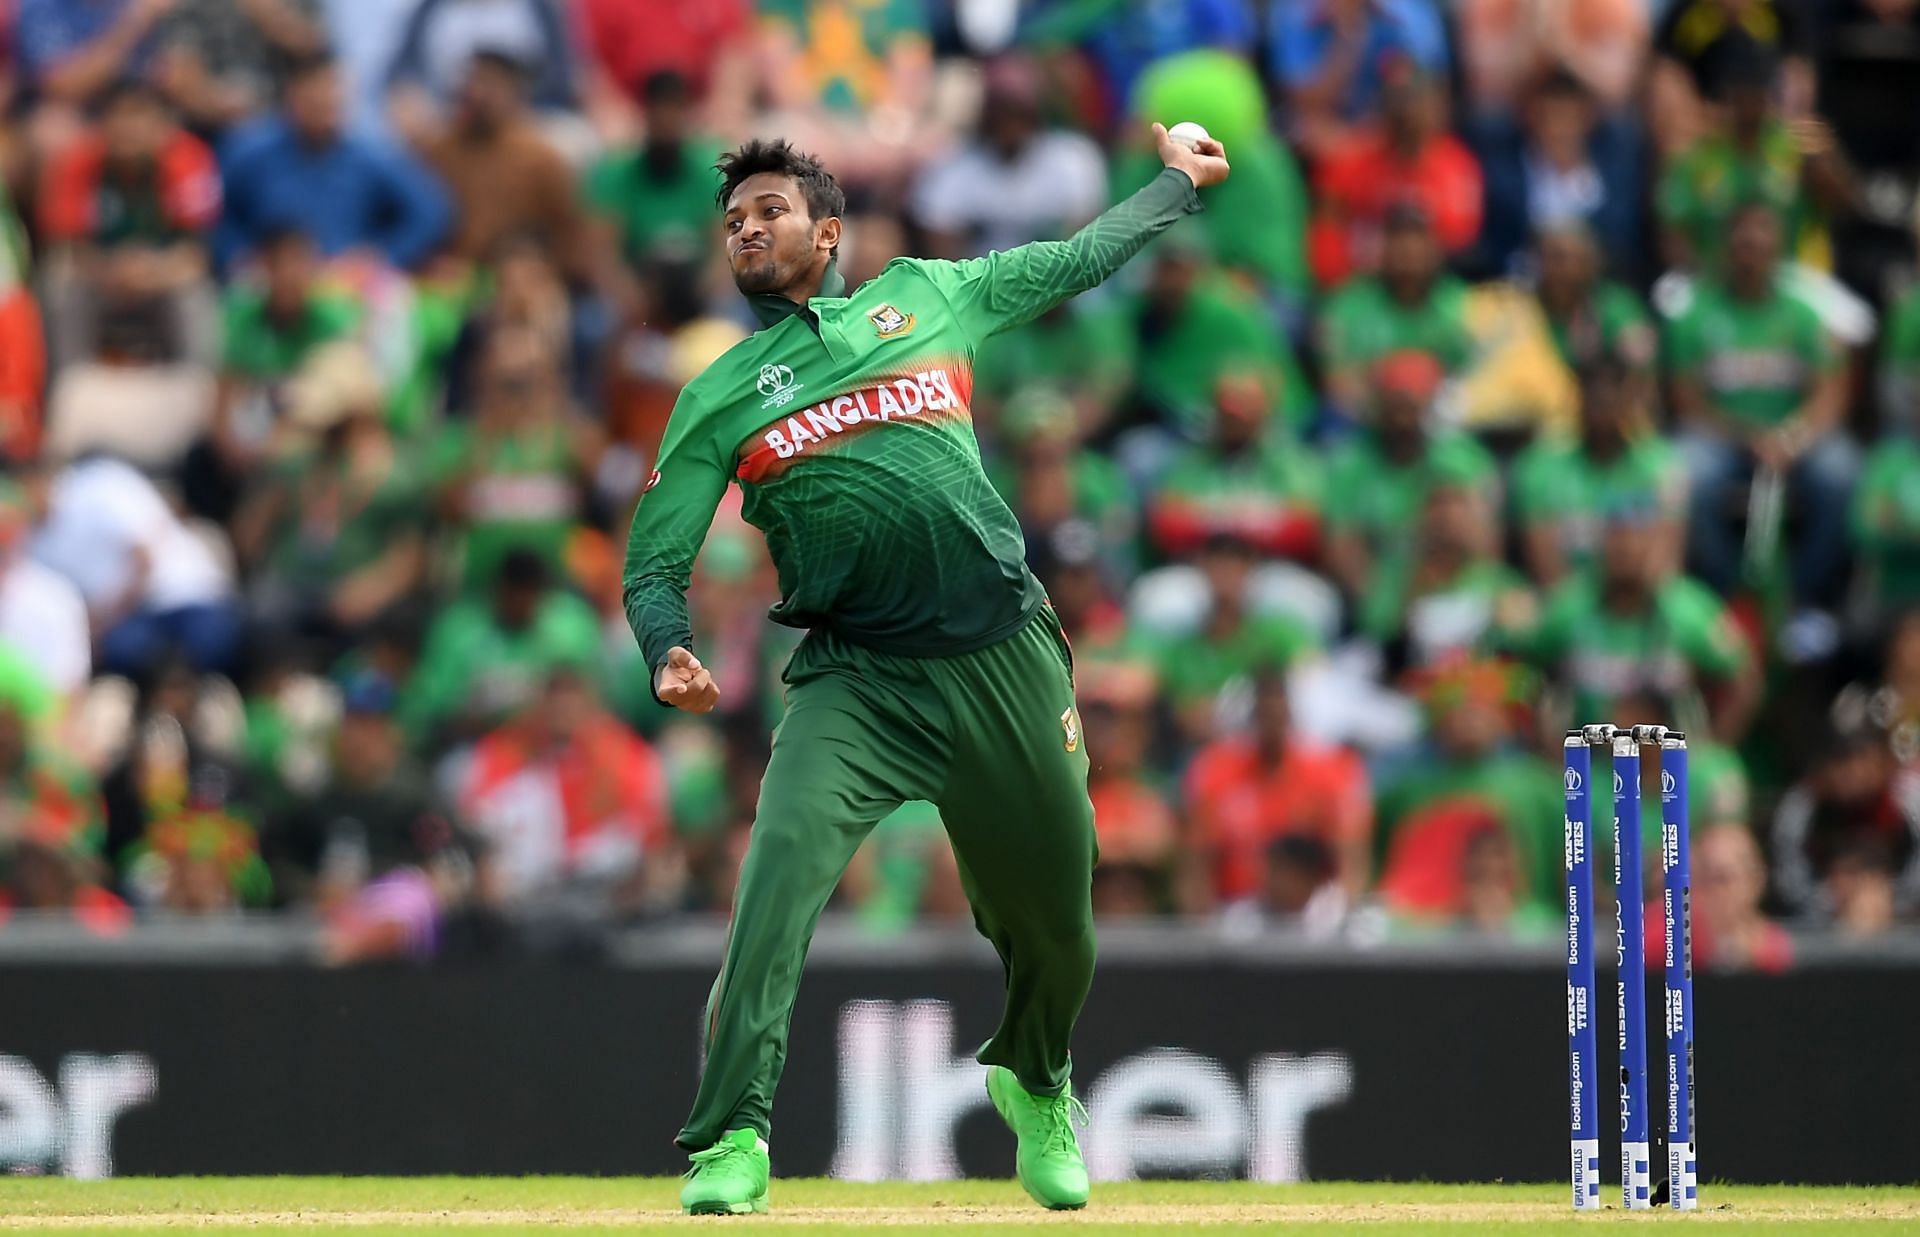 Bangladesh all-rounder Shakib Al Hasan has claimed two Player of the Match awards on the trot